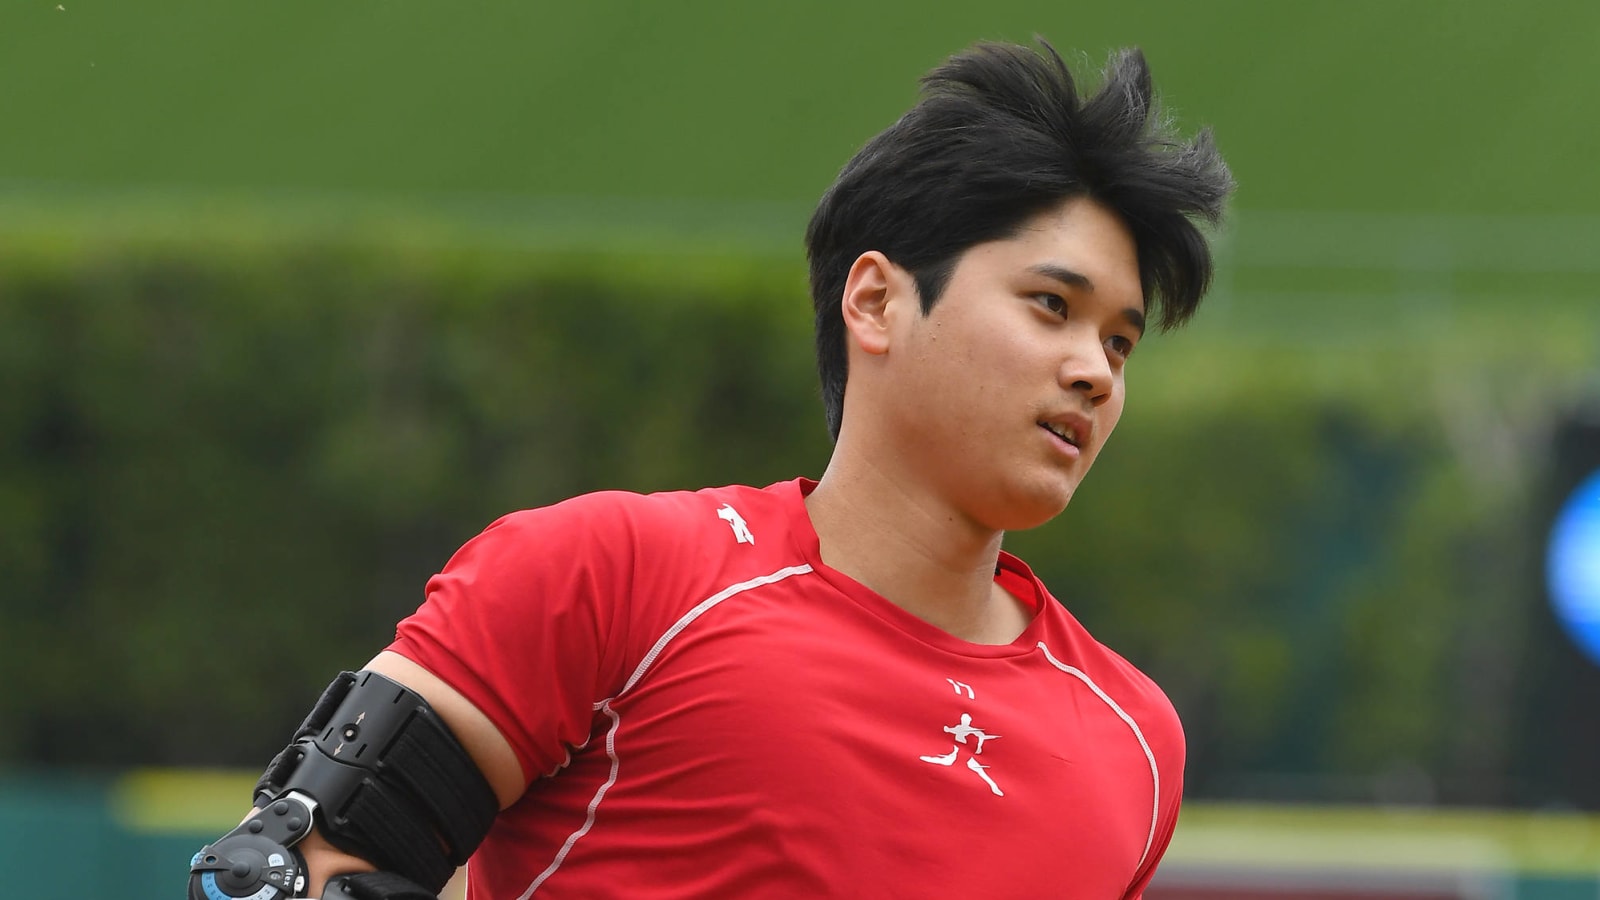 Shohei Ohtani could be facing challenges in rehab